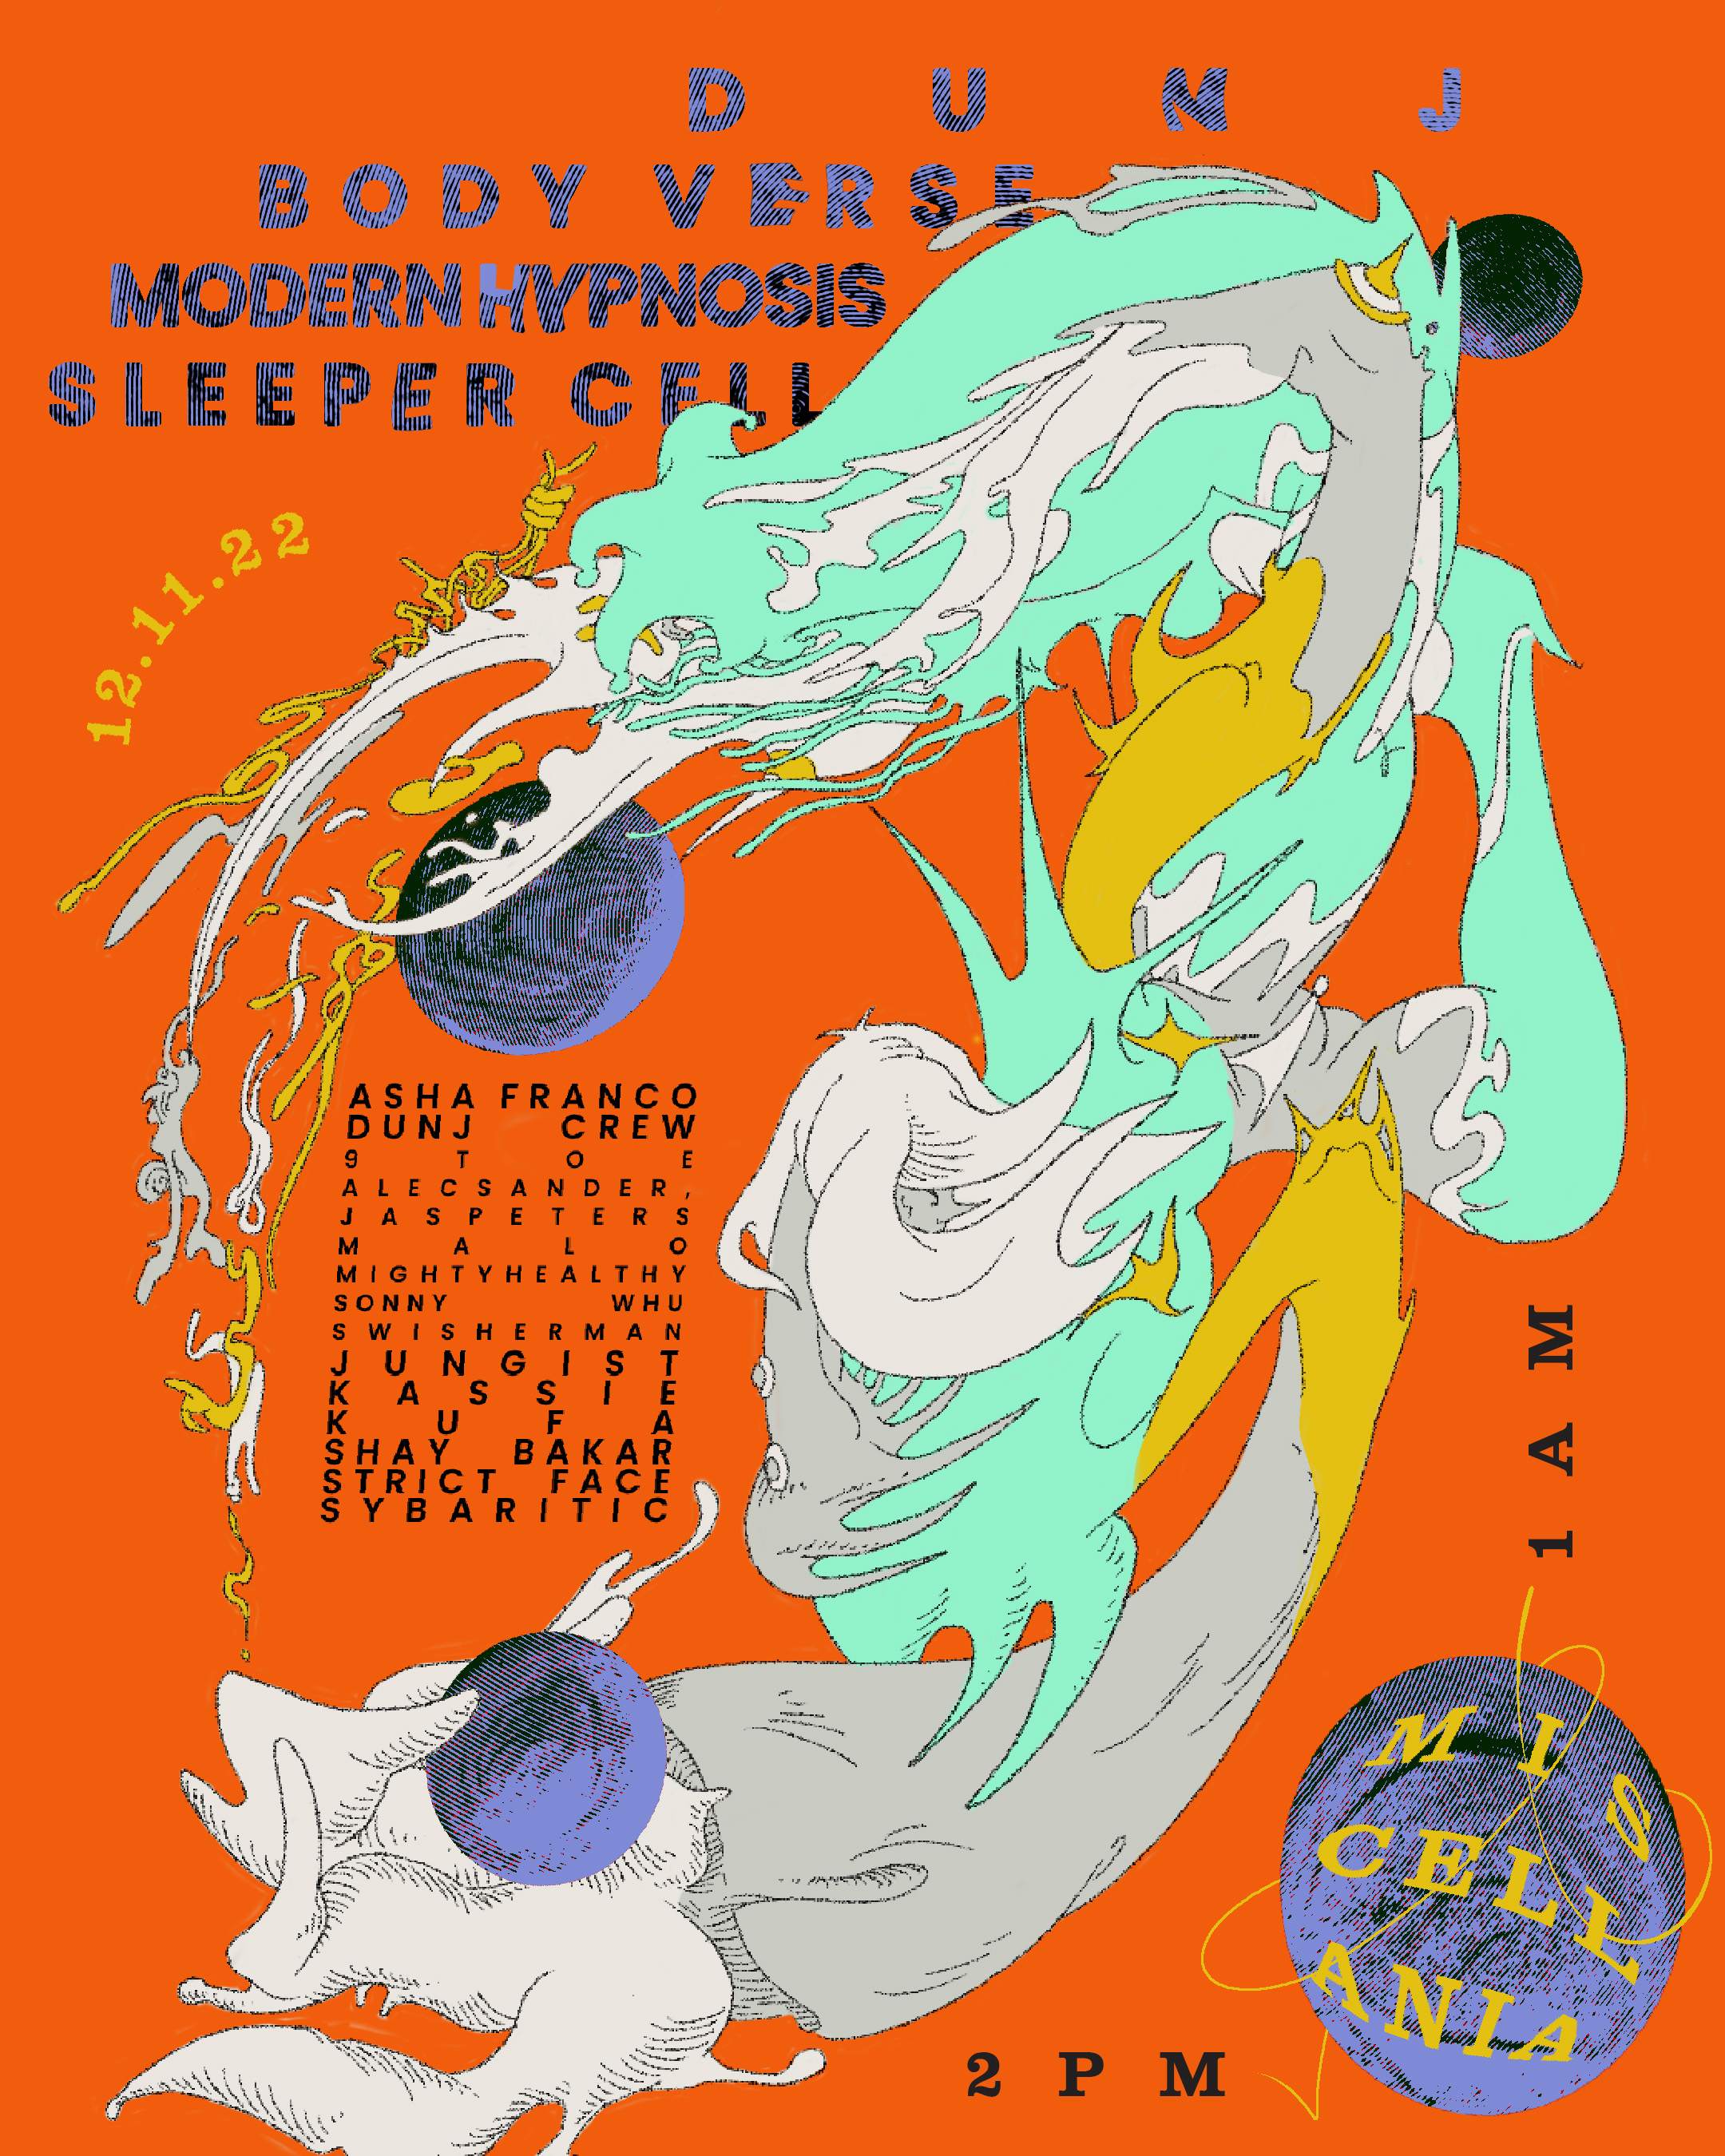 Dunj x Body Verse X Modern Hypnosis x Sleeper Cell with Strict Face - フライヤー表